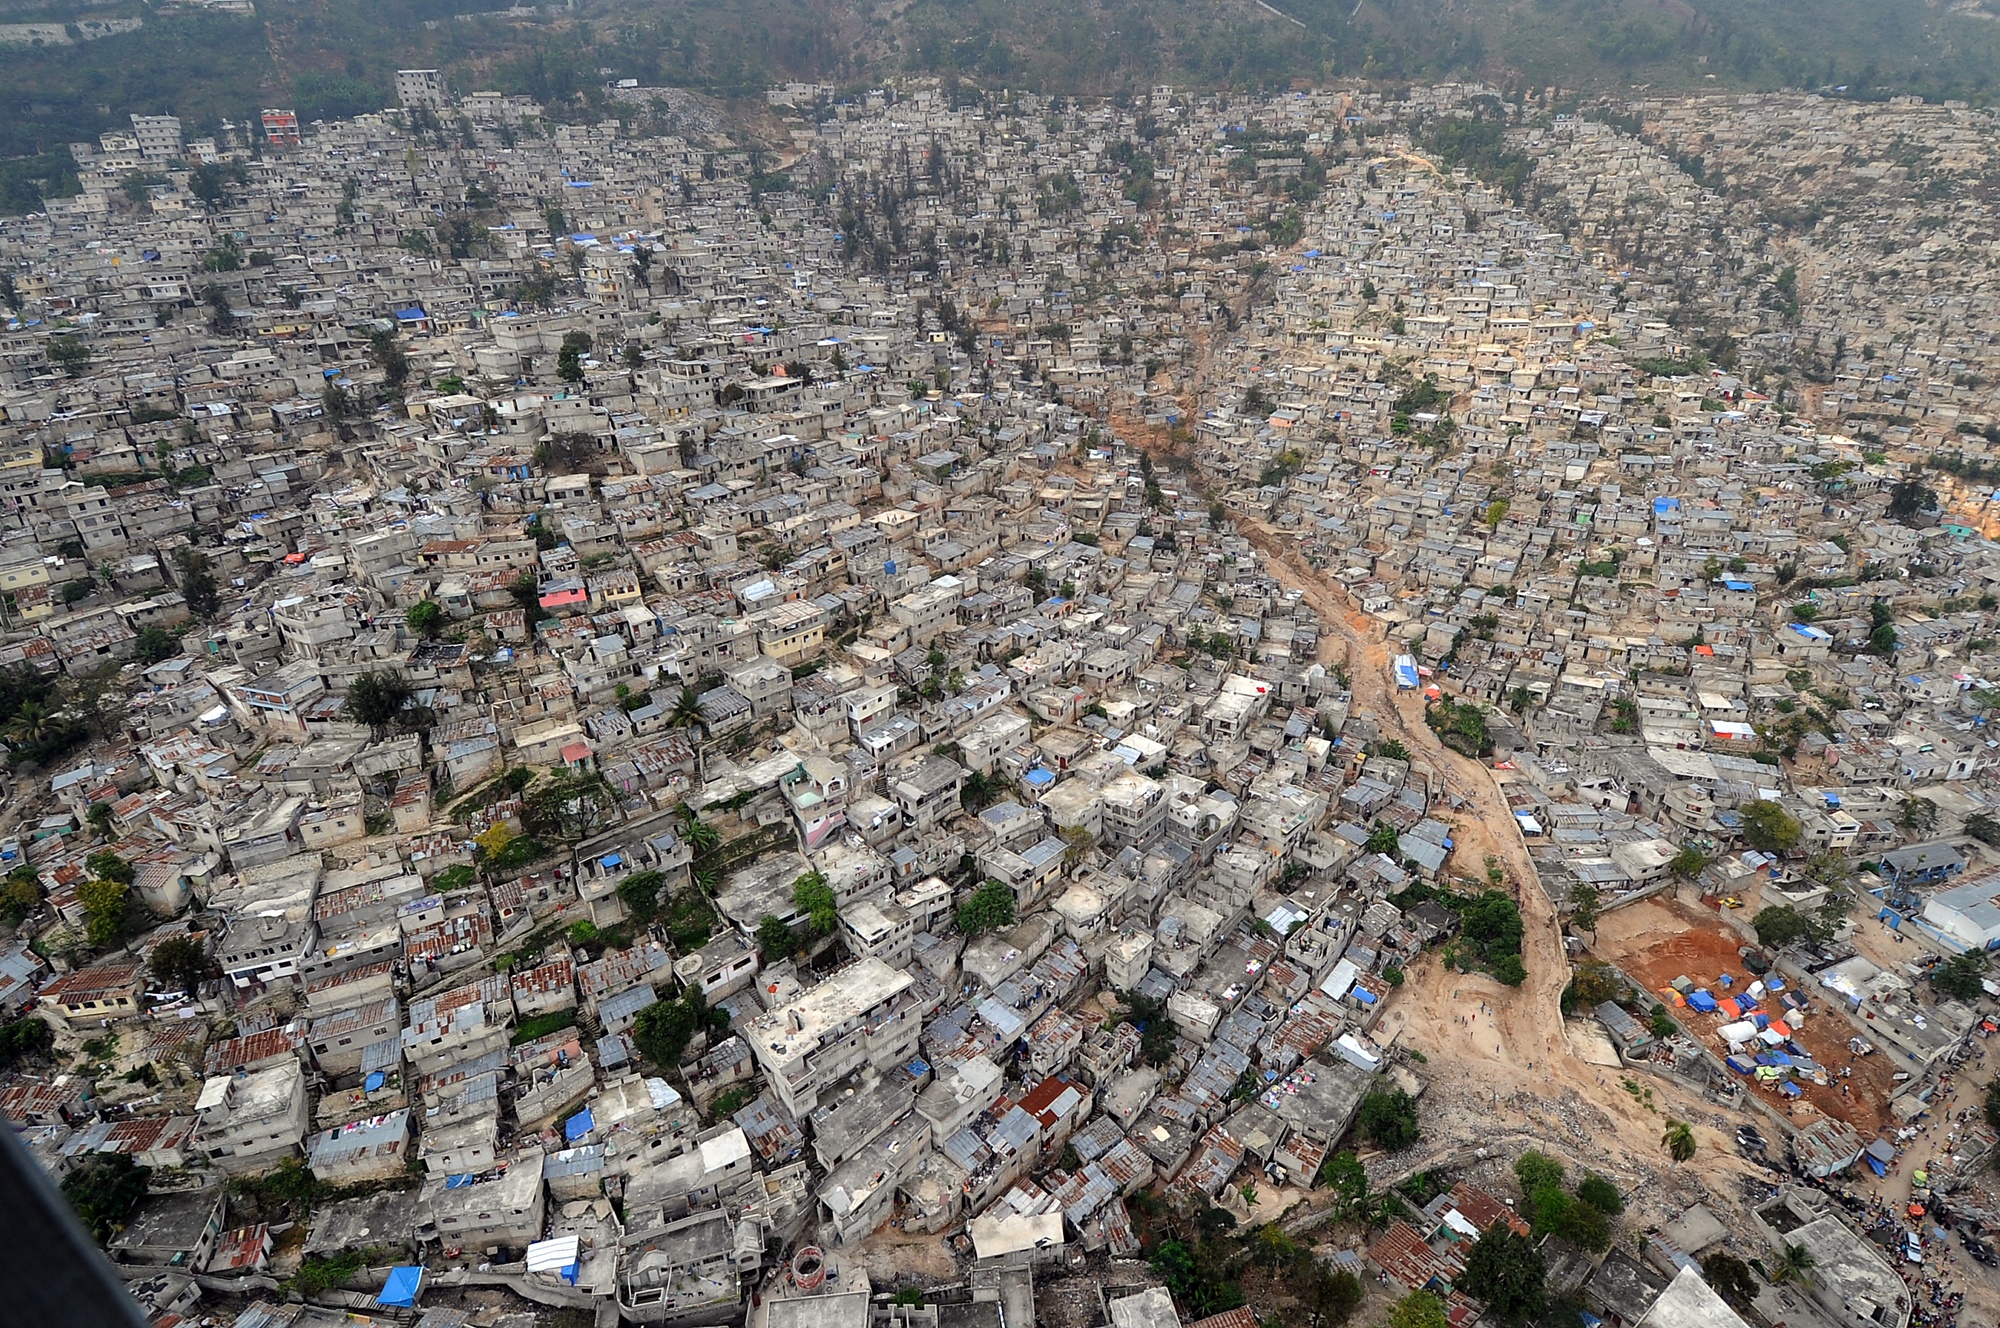 DVIDS - Images - An aerial view of Port-au-Prince, Haiti [Image 1 of 2]